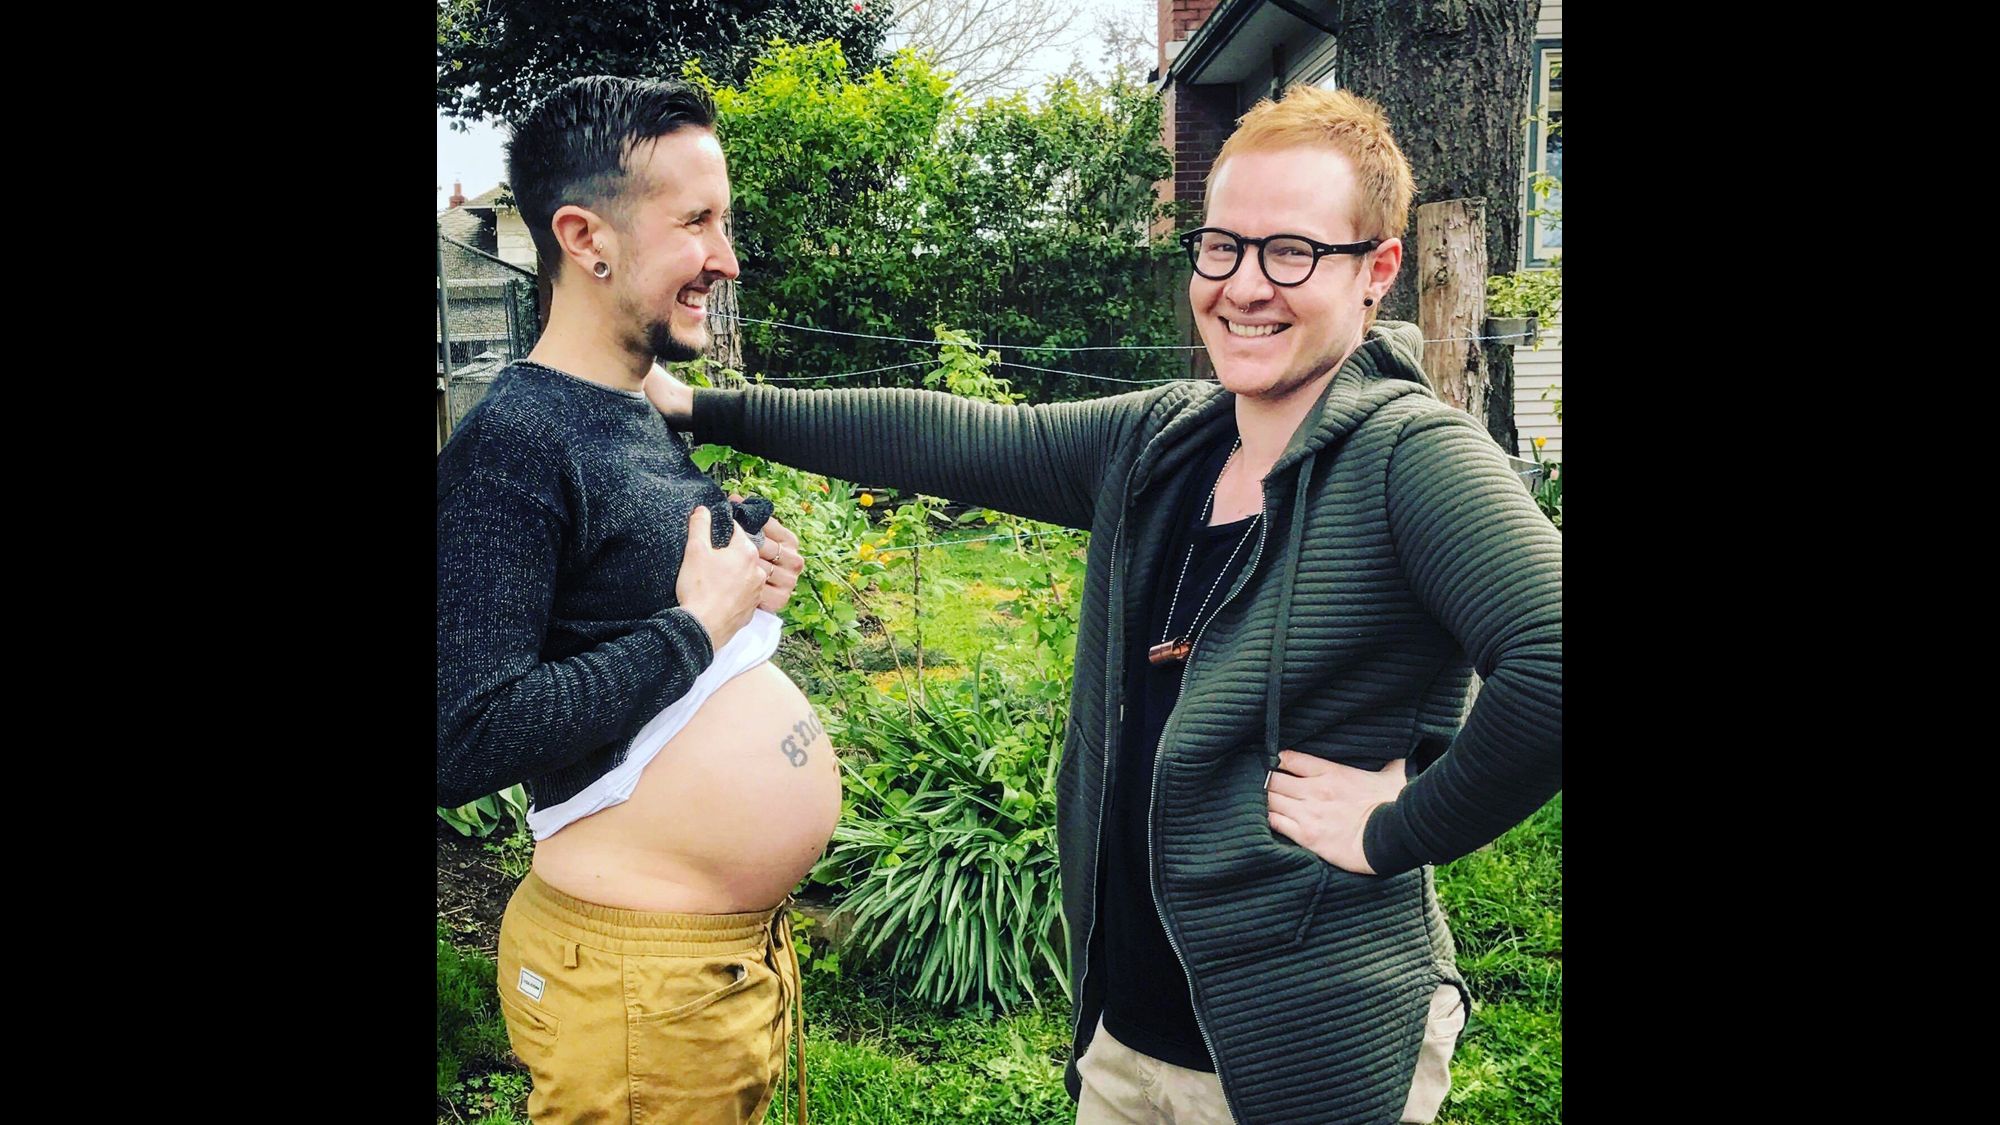 Trans man and partner expecting first child | CNN